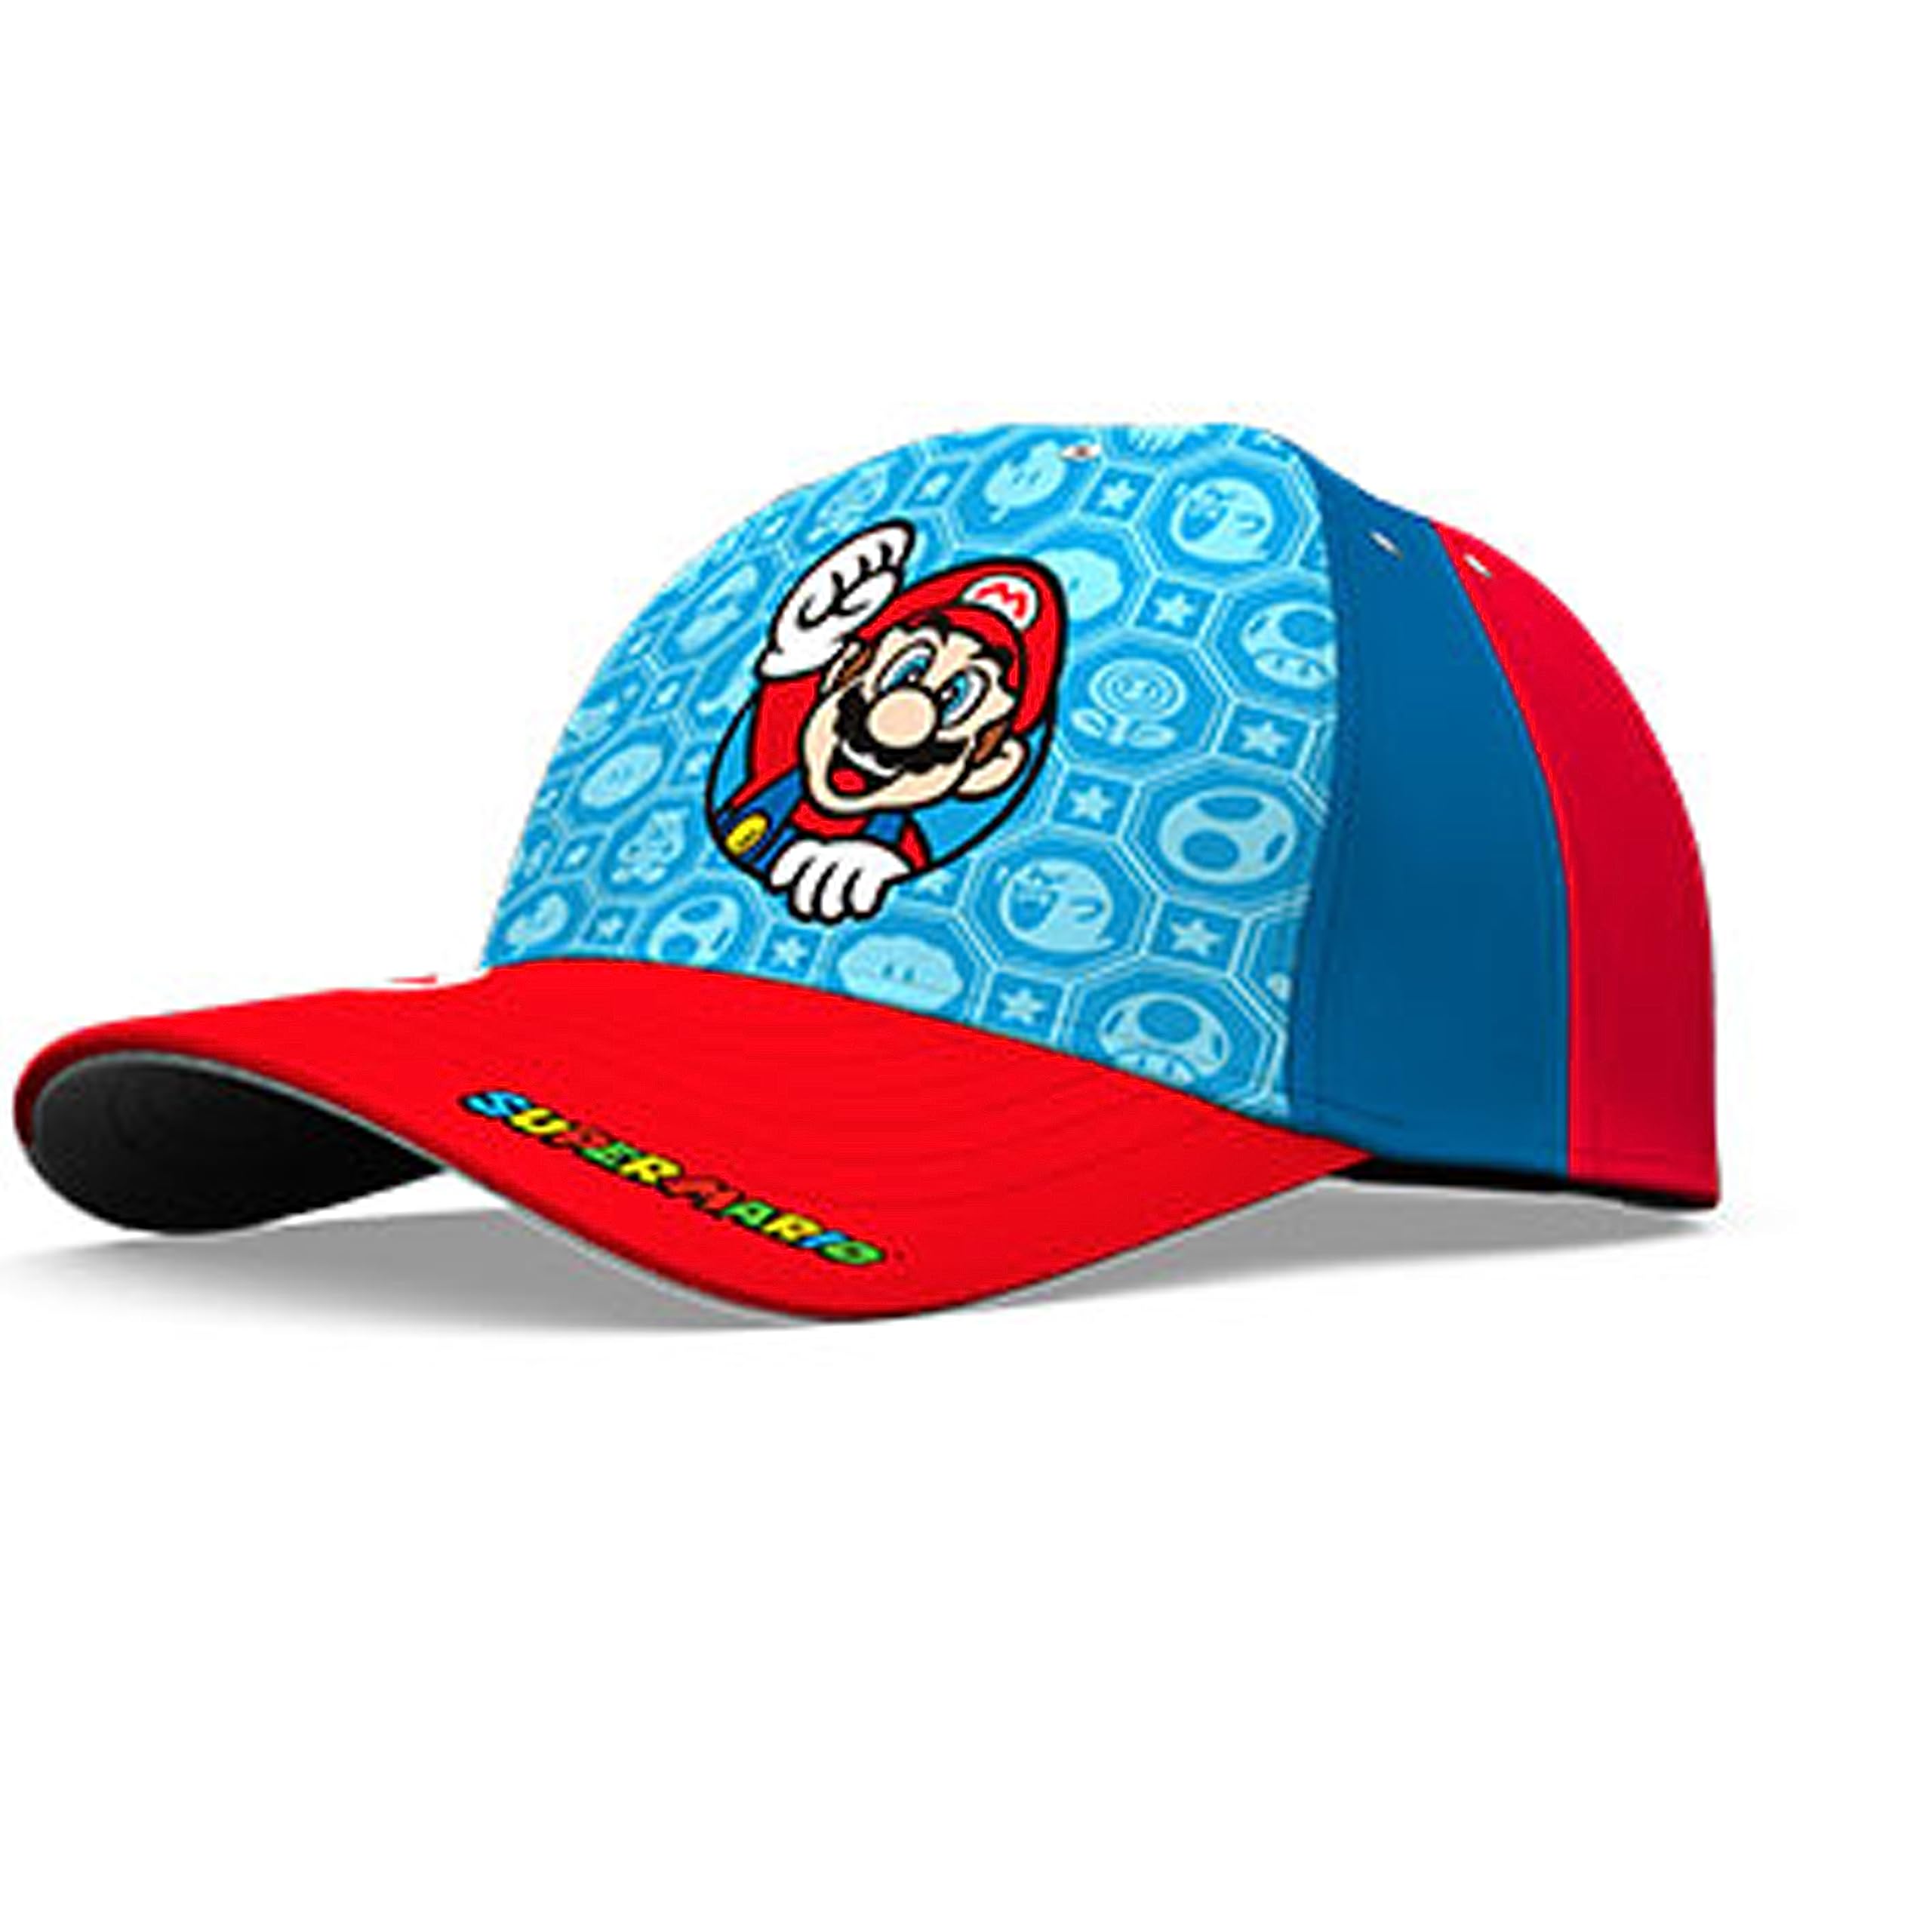 SRV Hub Super Mario Comfortable Baseball Cap, Cotton Soft and Lightweight Hat for Childrens, Kids Red Cap Ideal for Al